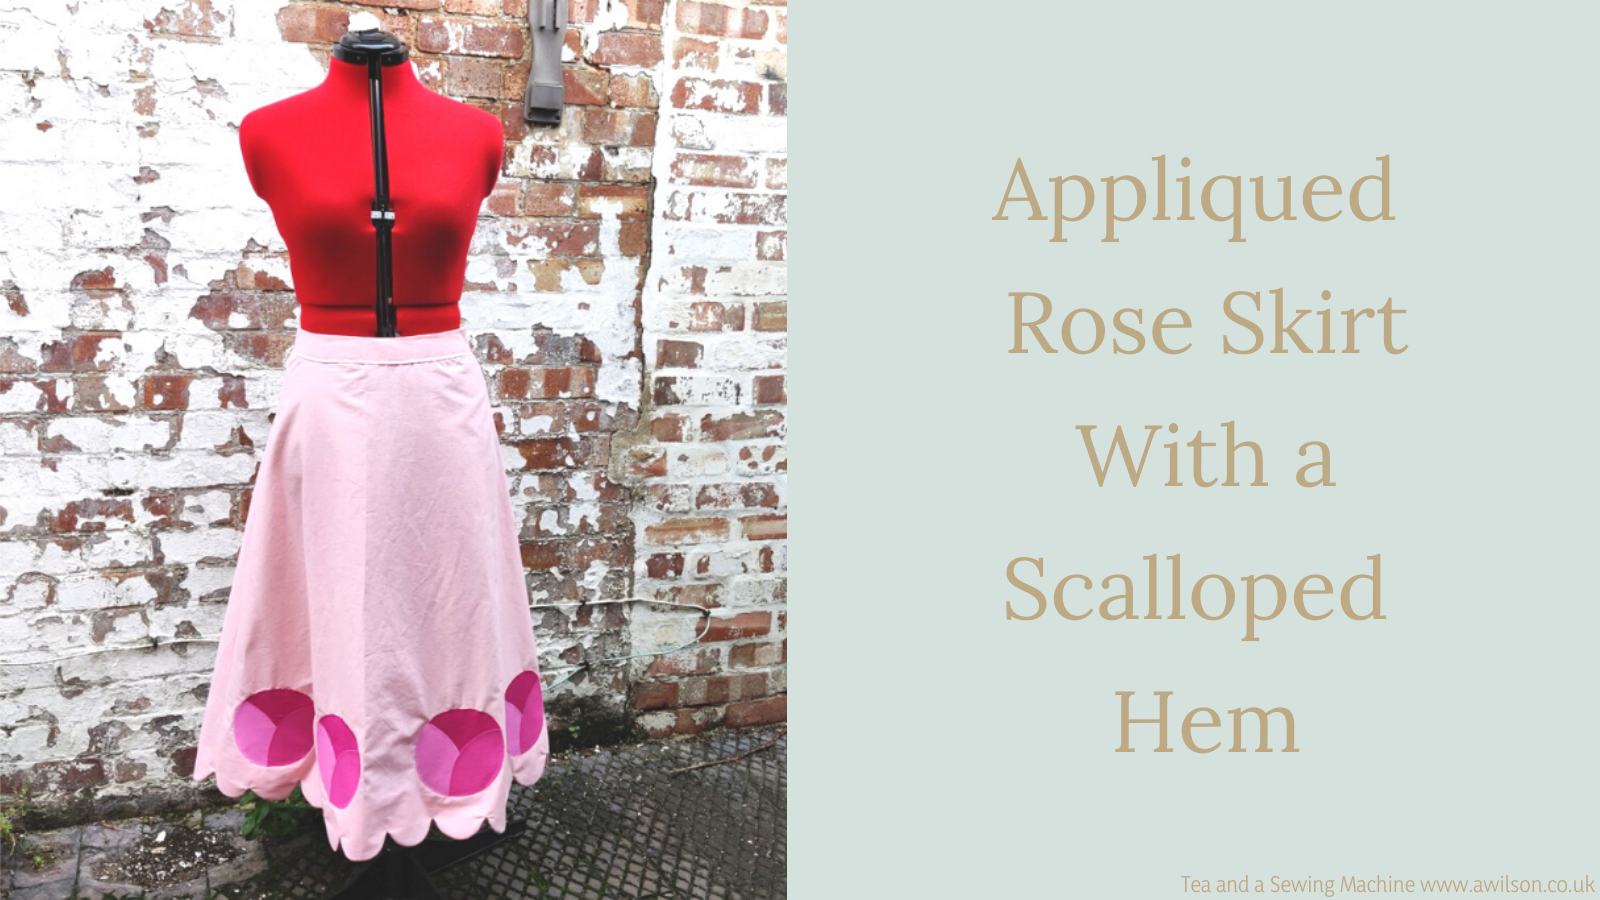 Appliqued Rose Skirt With a Scalloped Hem - Tea and a Sewing Machine